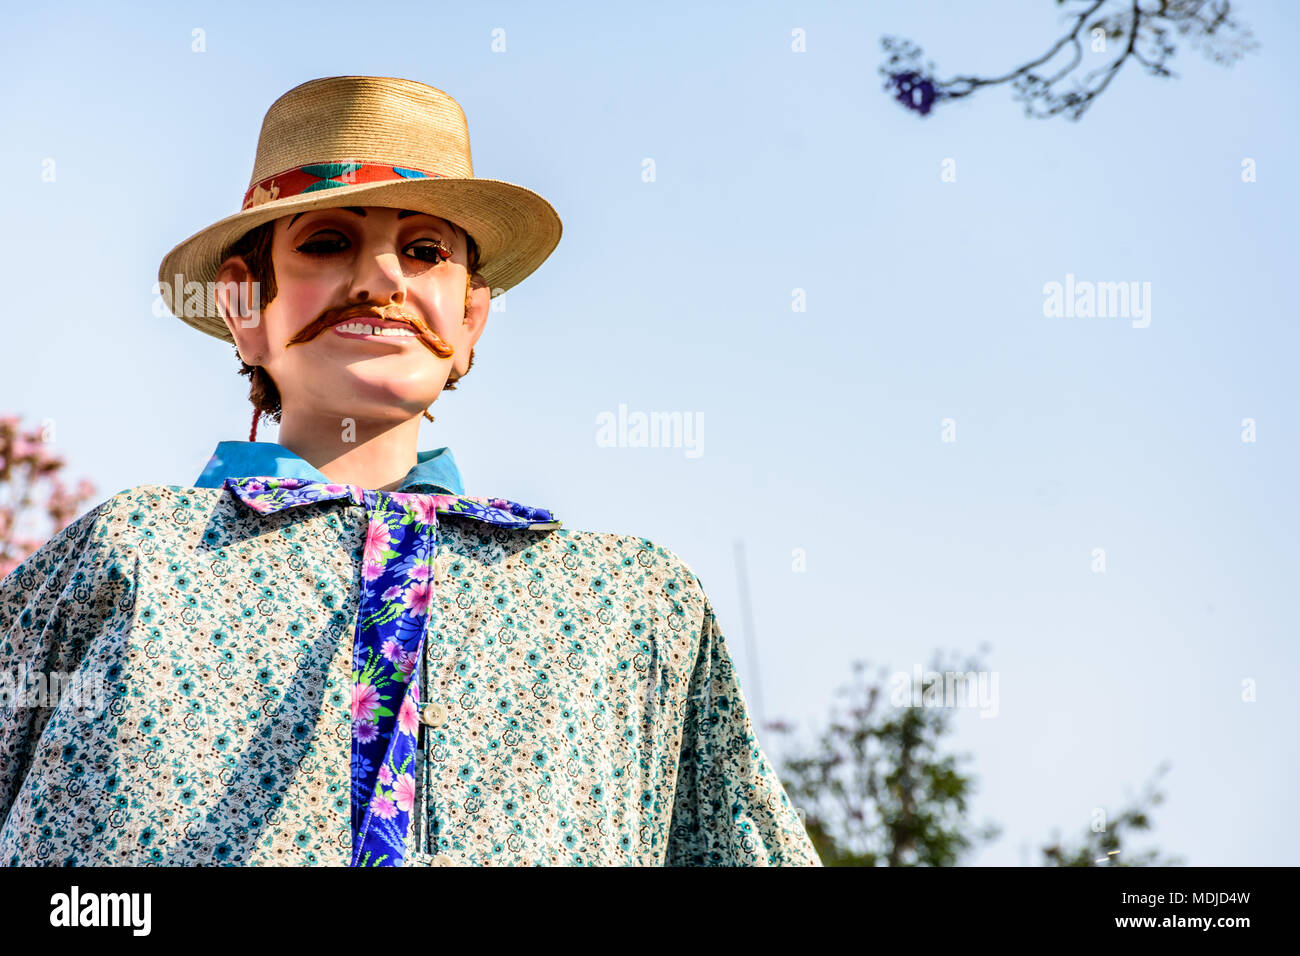 Antigua, Guatemala -  March 9, 2018: Closeup of traditional giant folk dancing puppet called a gigante in central plaza Stock Photo